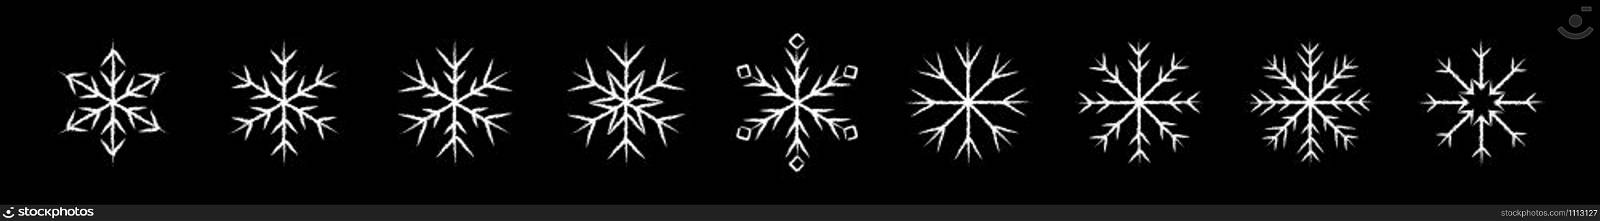 Icy snowflakes winter decoration collection vector illustration. Set of chalk sketch white snowflake icons on blackboard for new year celebration design or winter season festive ornament decoration. White chalked snowflakes winter decoration set